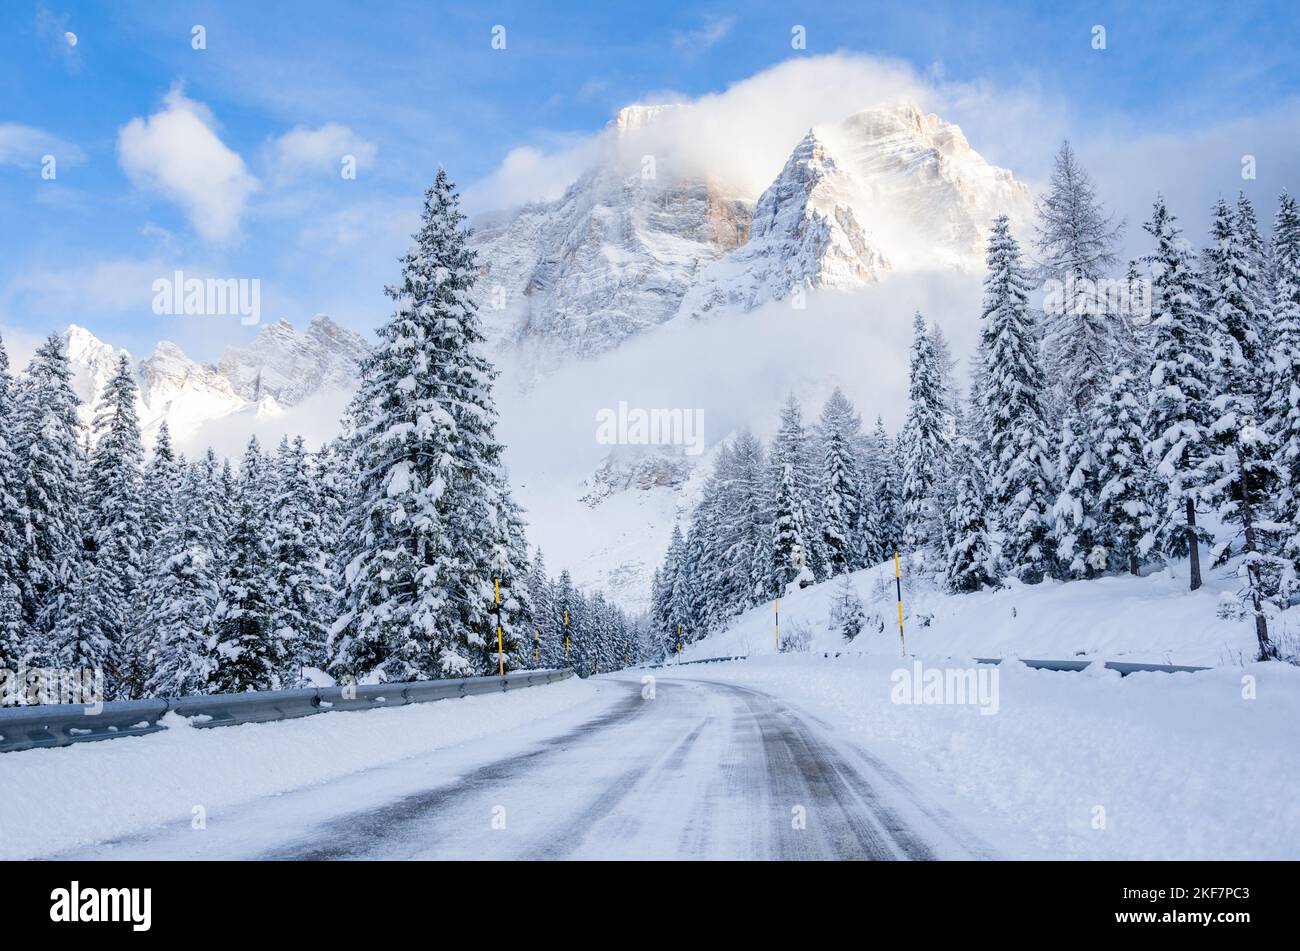 Icy road running through a snowy forest at the foot of a towering mountain on a winter day Stock Photo